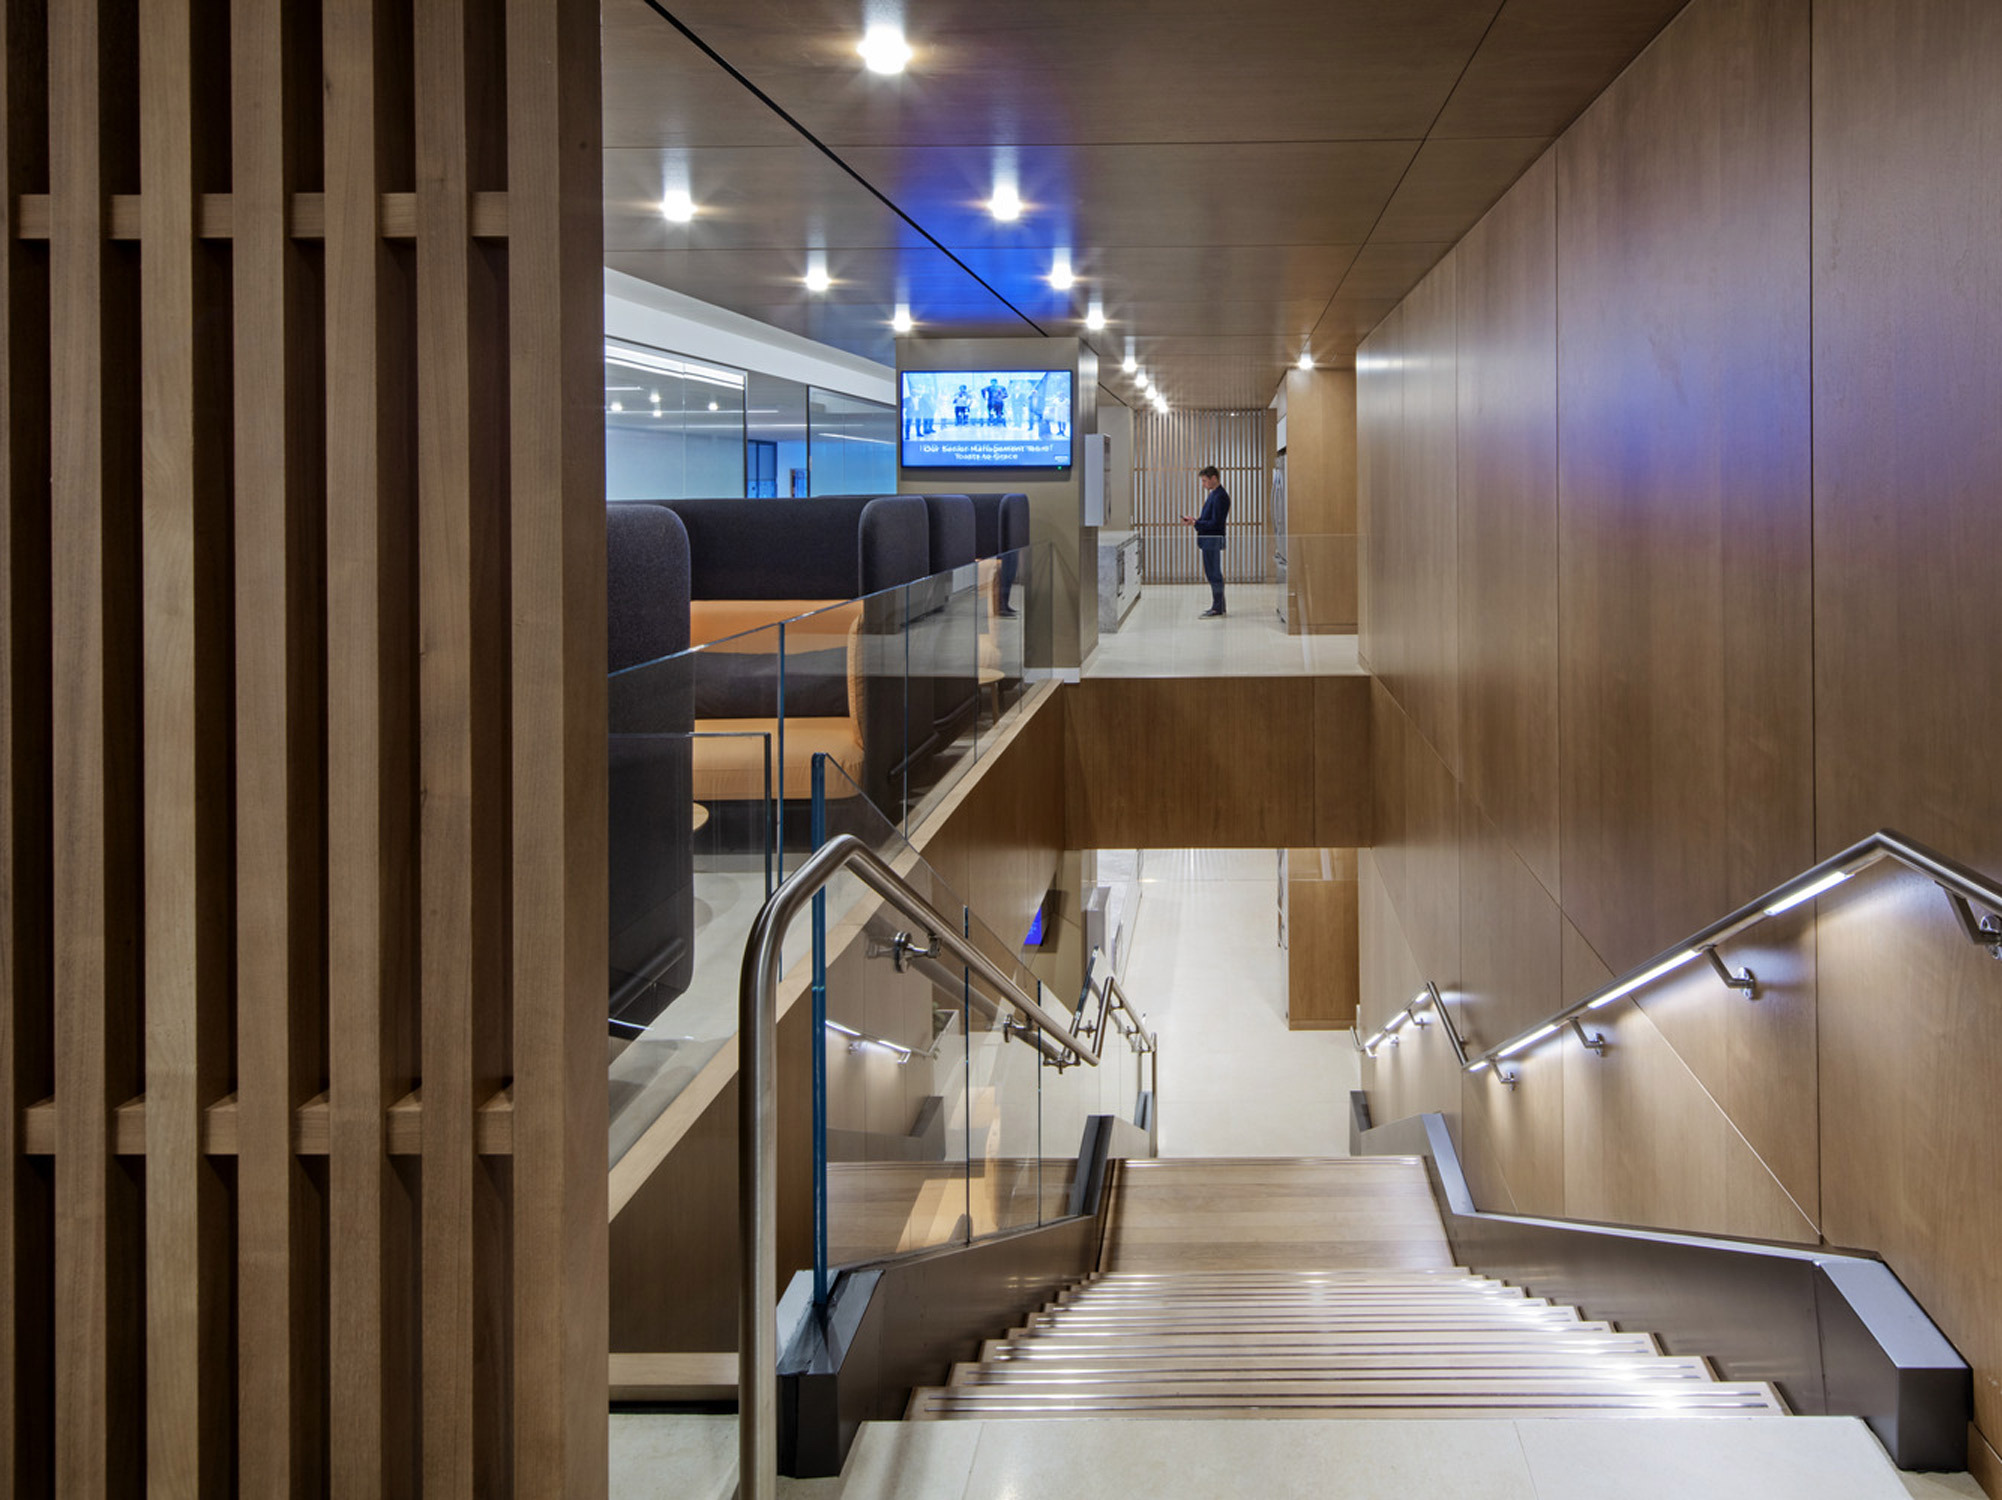 Contemporary staircase design integrating wooden panels and glass balustrades, complemented by recessed LED step lighting. The staircase ascends alongside comfortable seating areas with plush blue upholstery, offering a glimpse into a dynamic, well-lit corporate space.